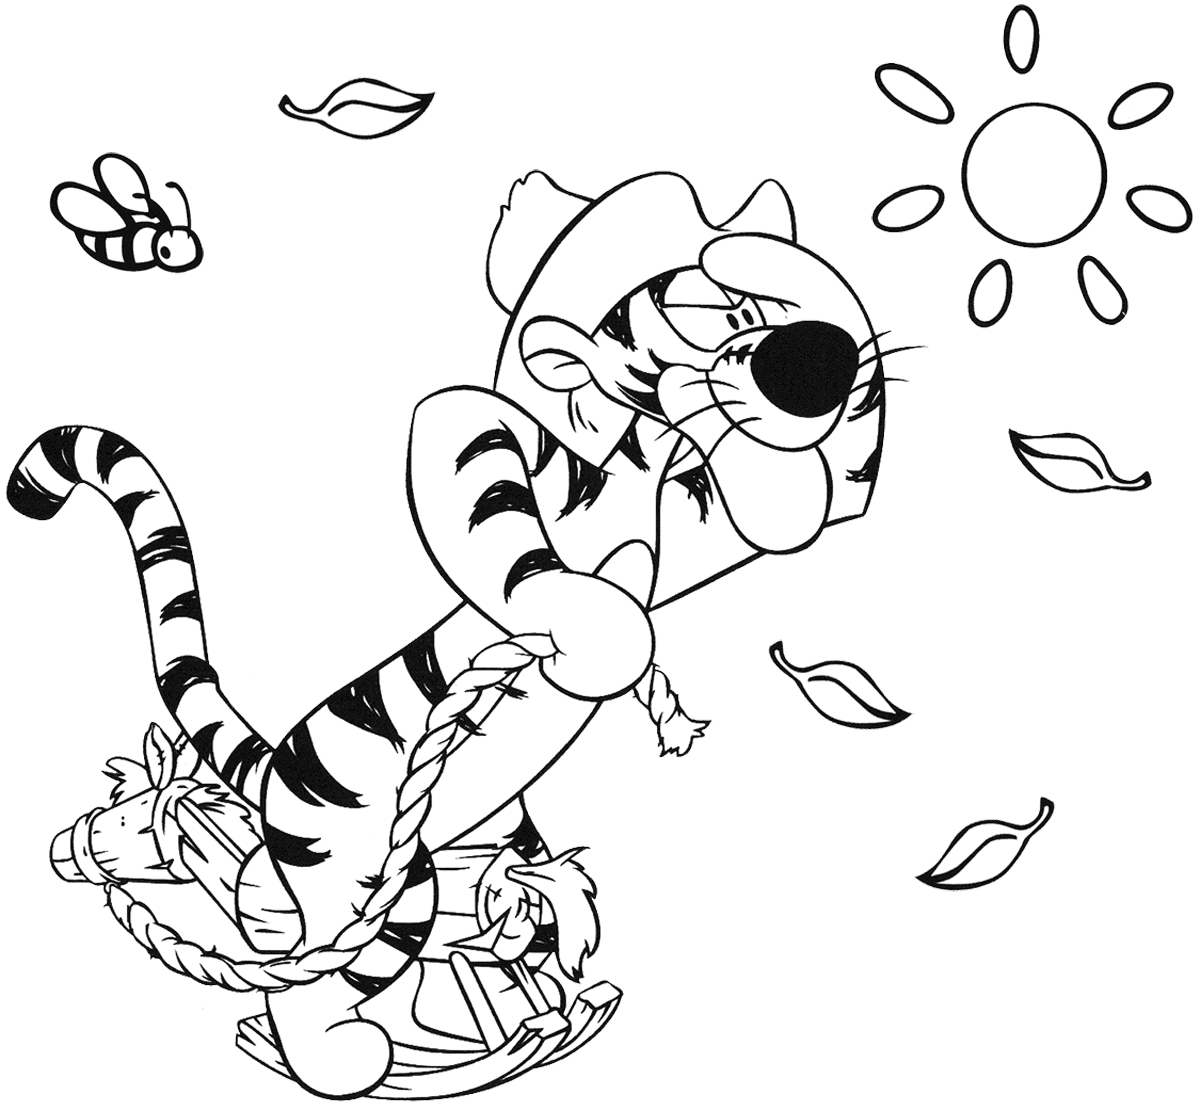 Download Tigger From Winnie The Pooh Coloring Pages - Coloring Home